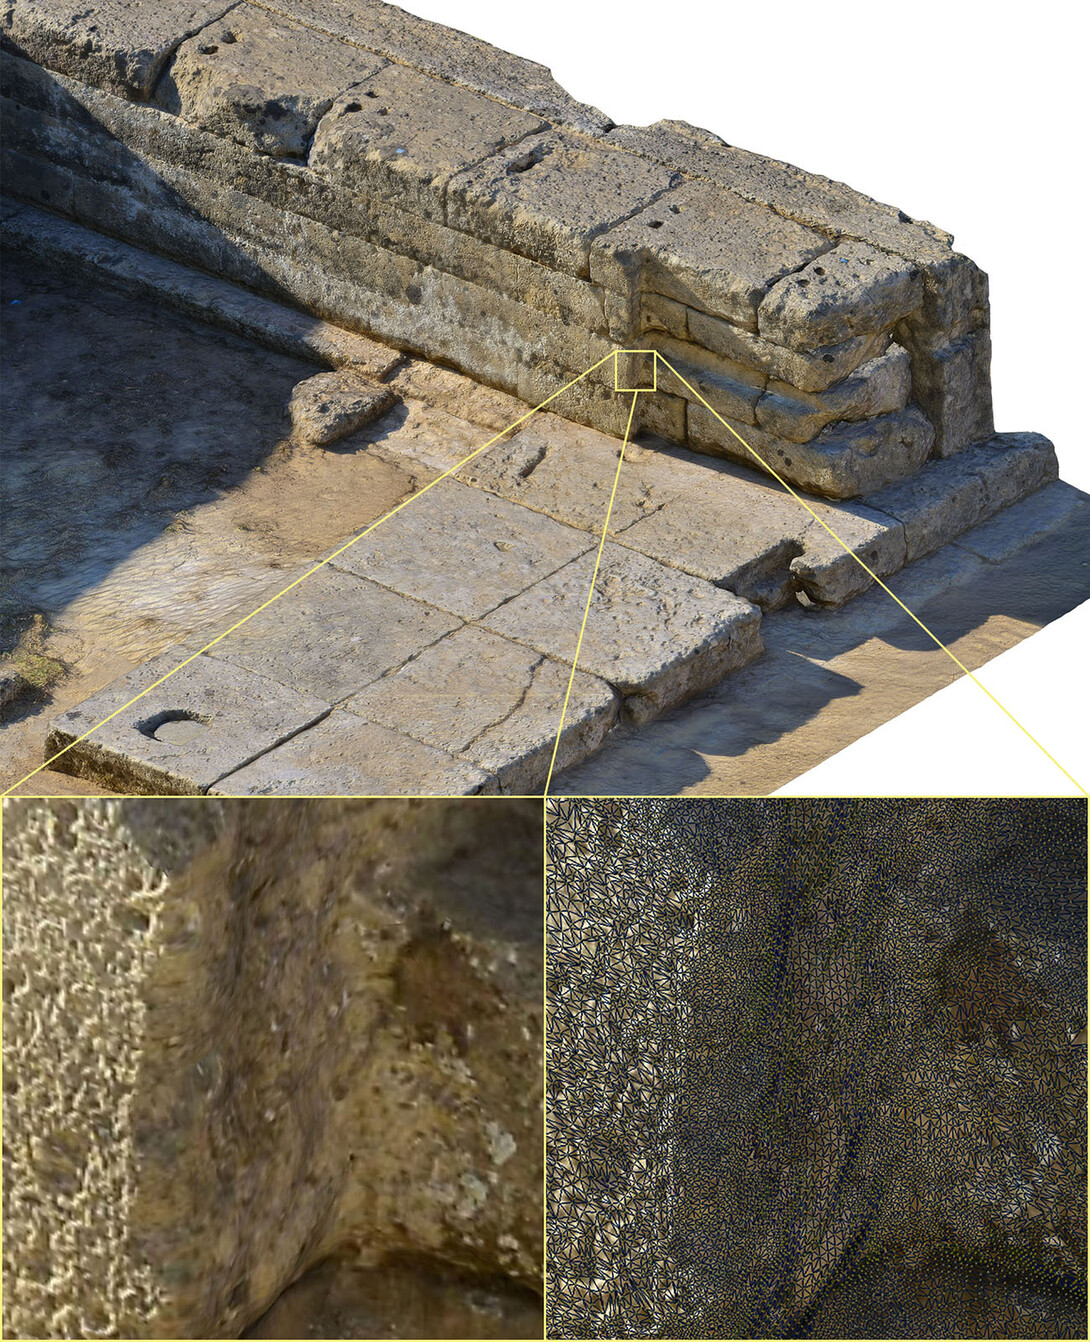 Philip Sapirstein is using a software program to combine individual photos into 3-D images of ancient Greek temples. The program uses the images to generate a 3-D grid (lower right) and projects details from the photo onto the grid (top and lower left).